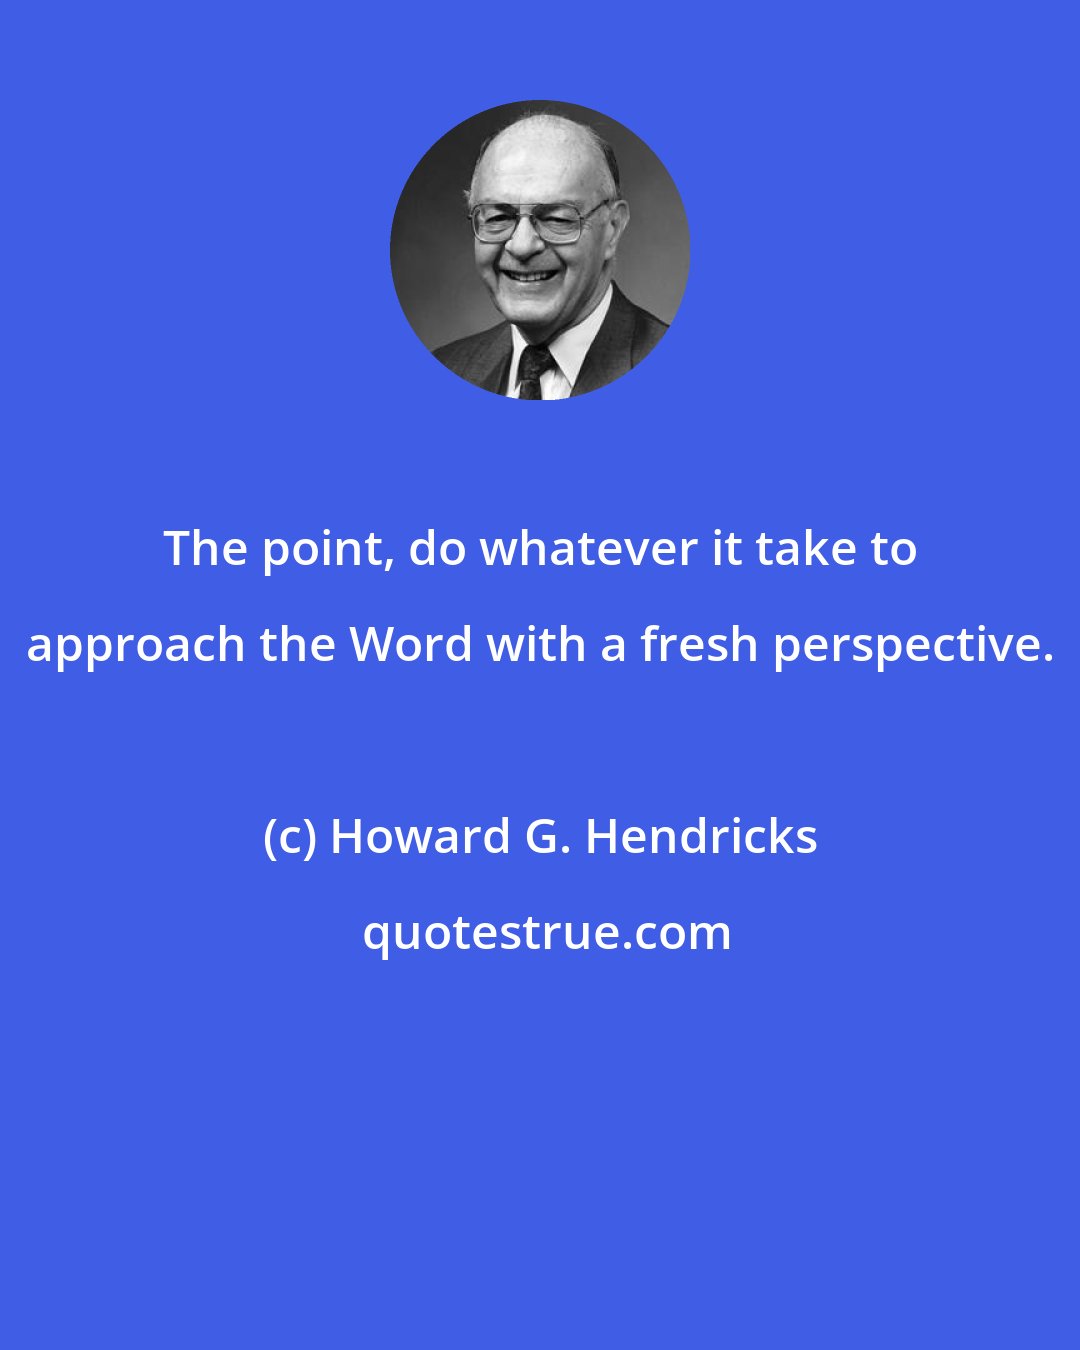 Howard G. Hendricks: The point, do whatever it take to approach the Word with a fresh perspective.